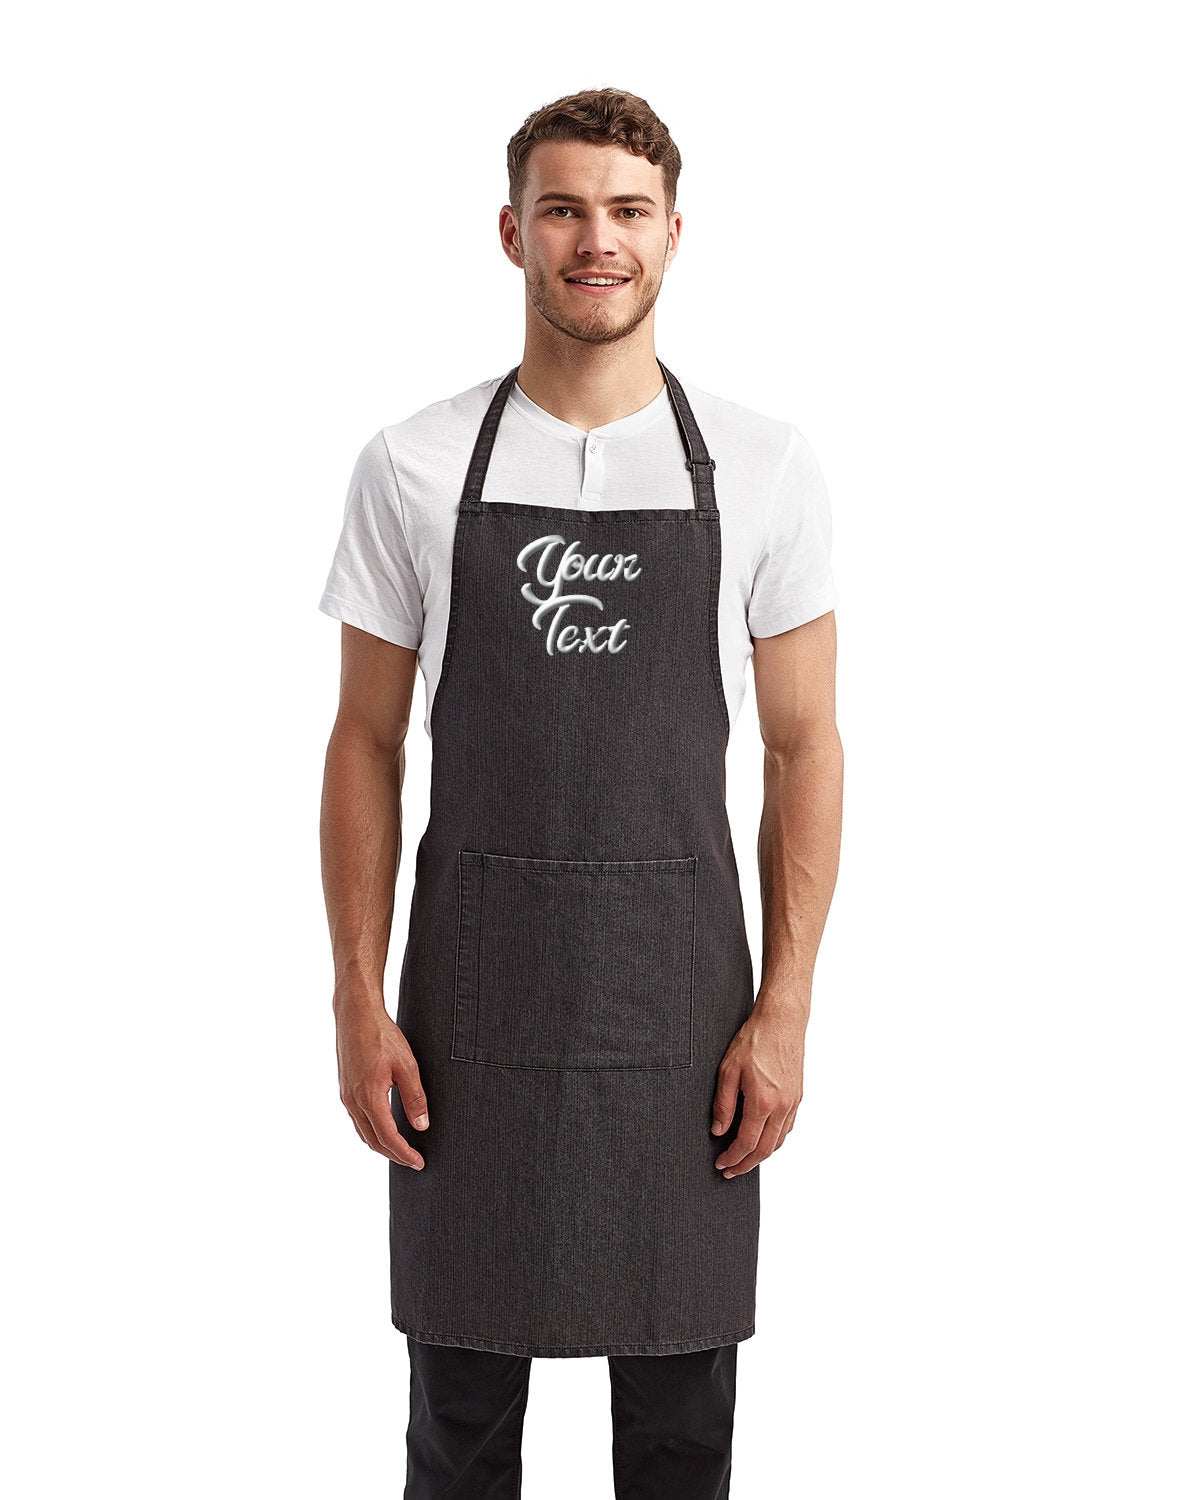 Restaurant Aprons with Your Company Name Embroidered - 3 Pack denim